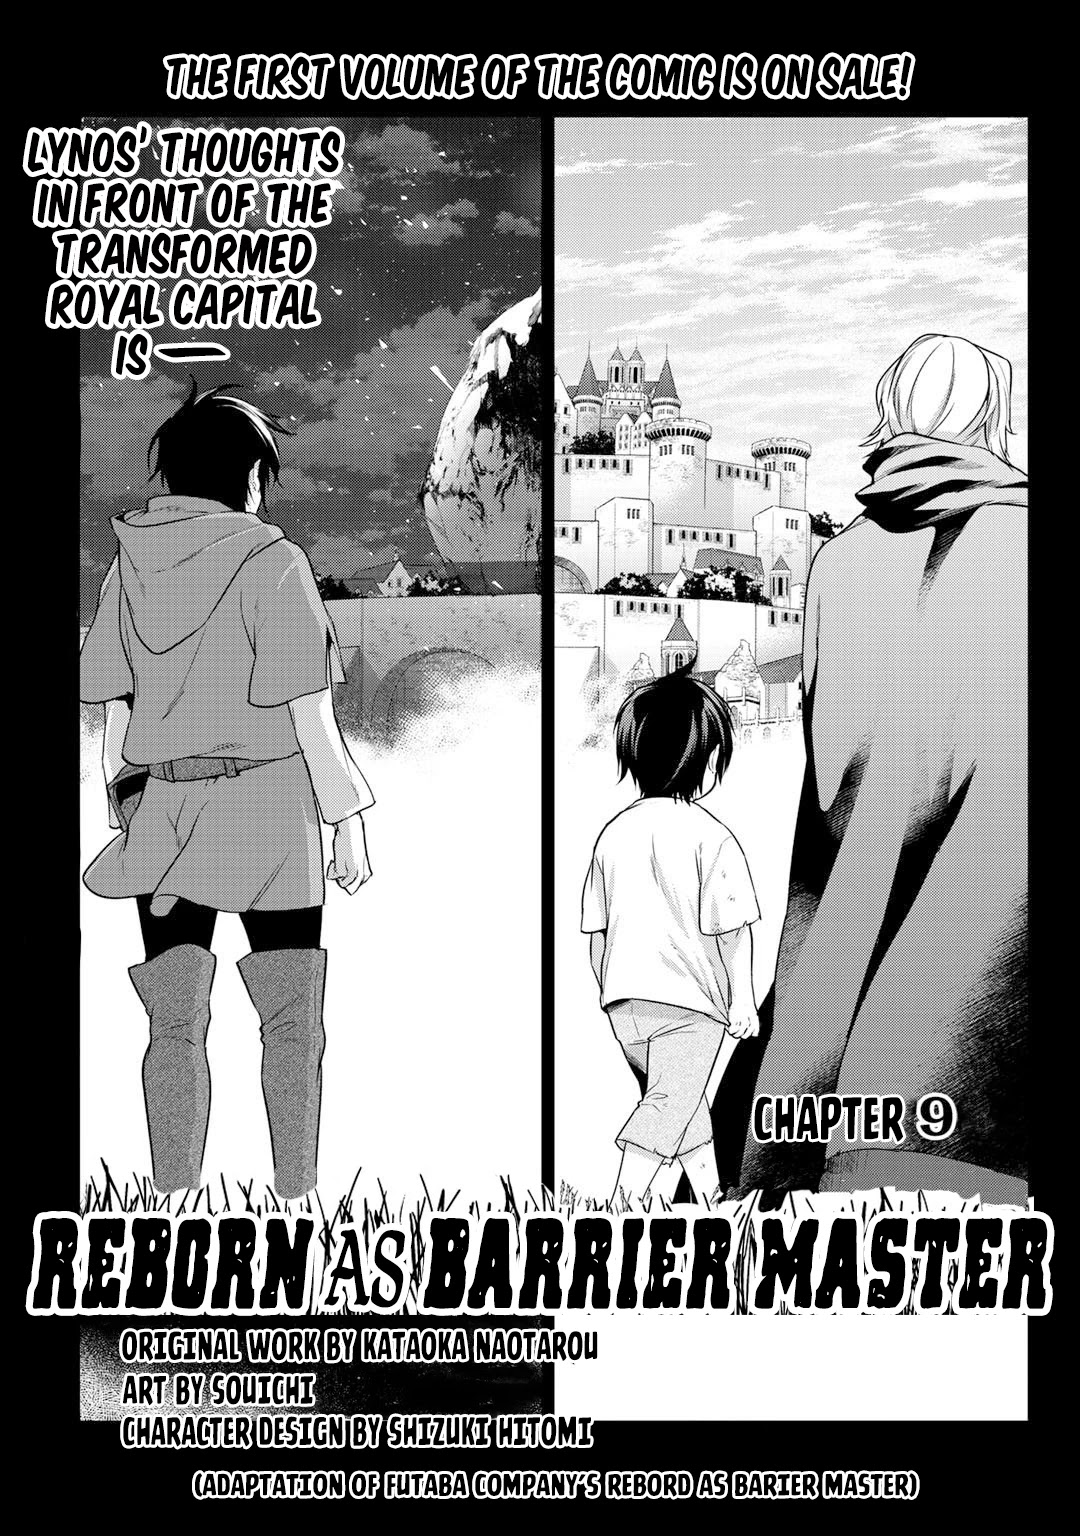 Reborn As A Barrier Master - Page 2